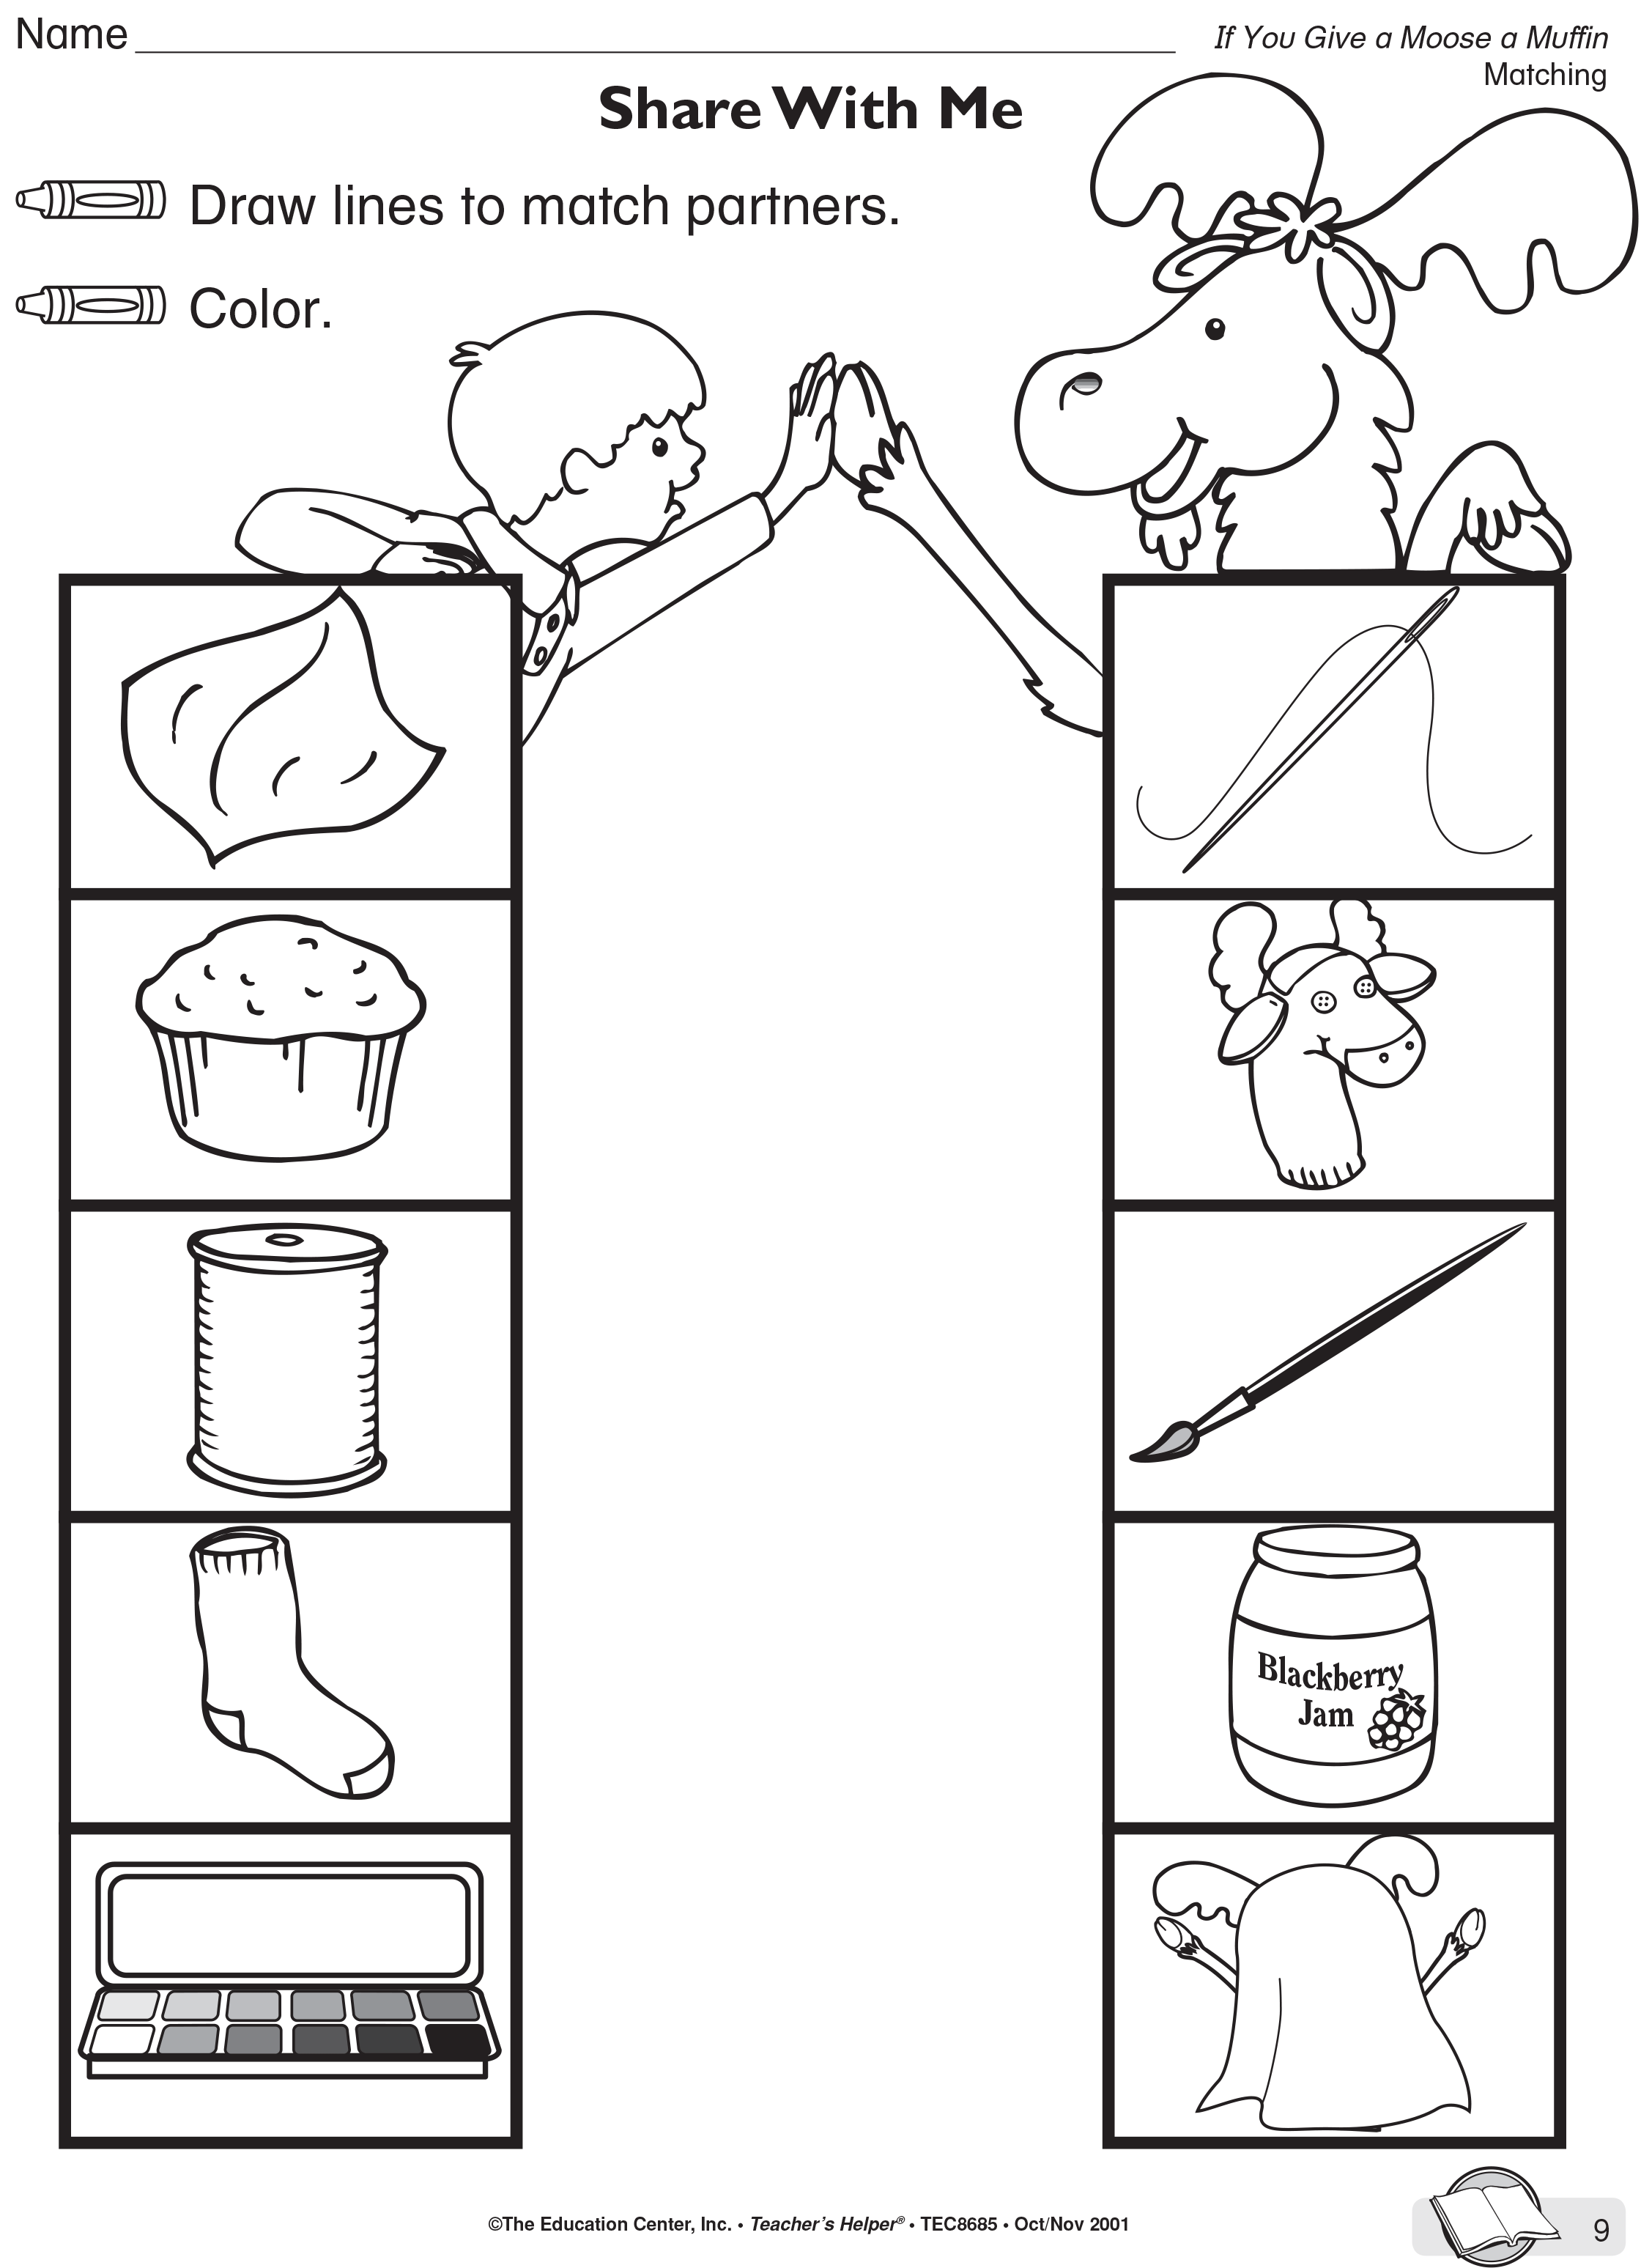 If you give a moose a muffin activity sheet